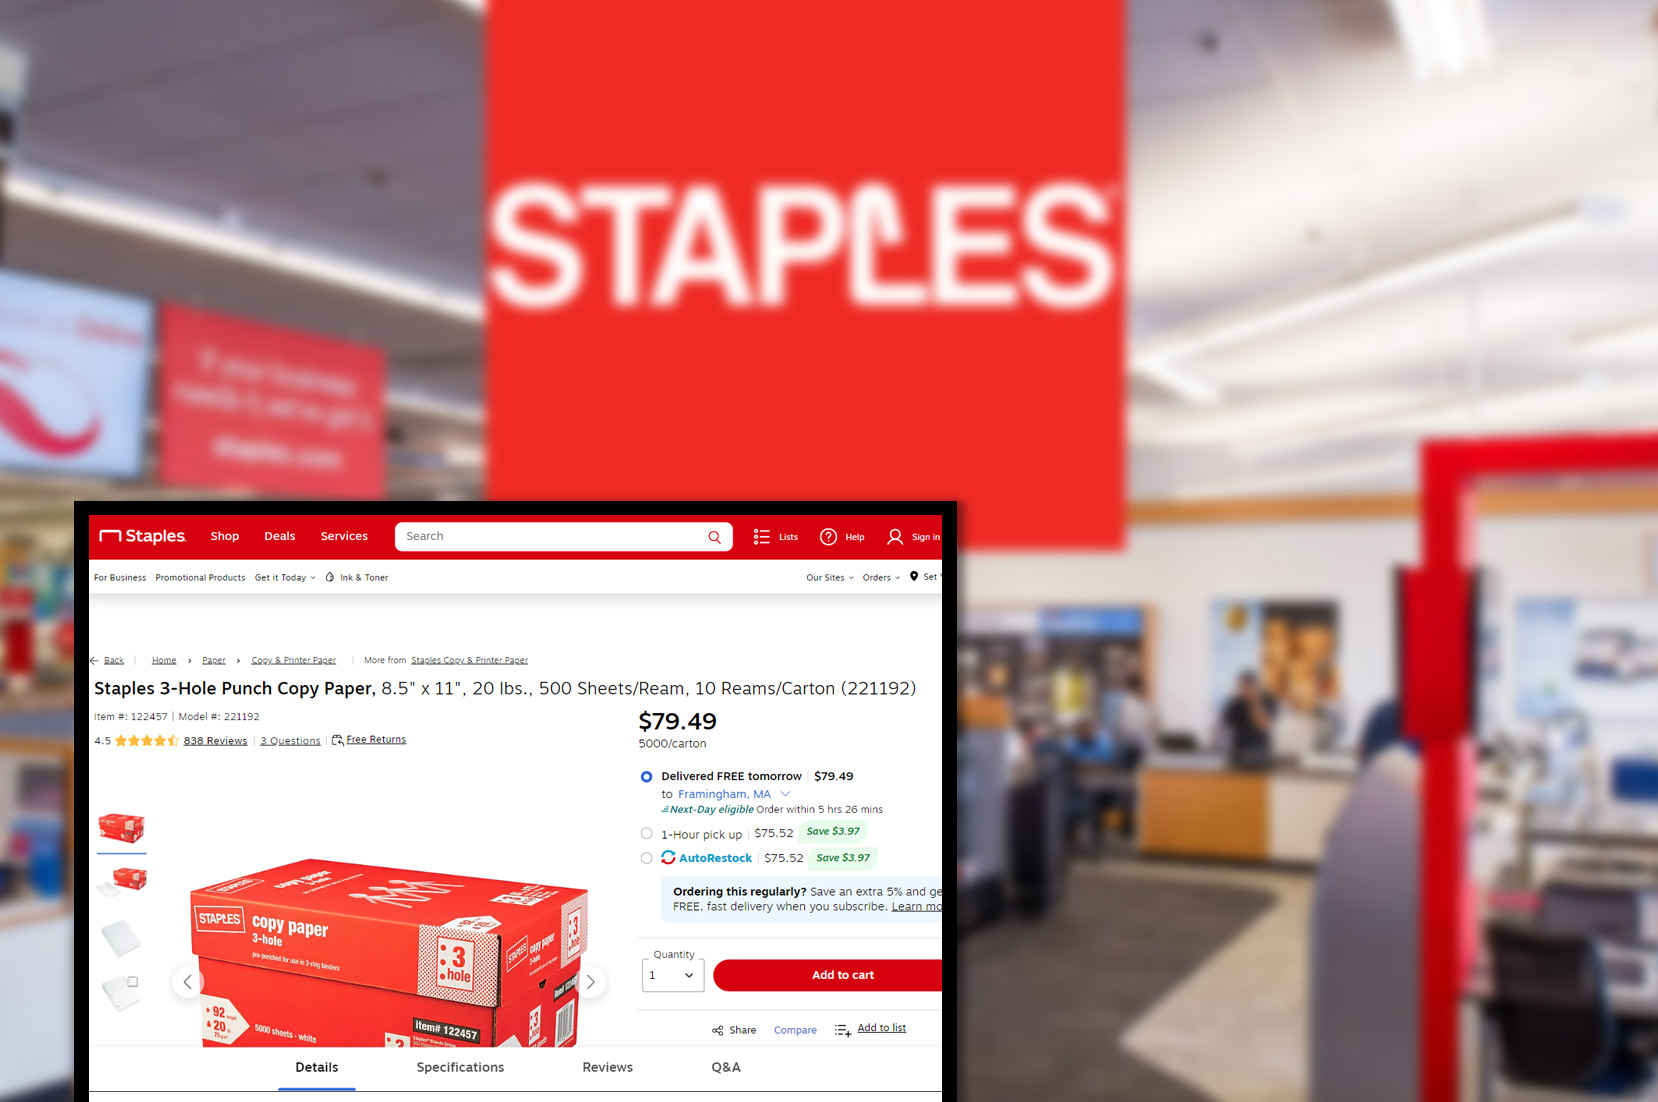 staples-comproduct-pricing-information-and-image-scraping-services